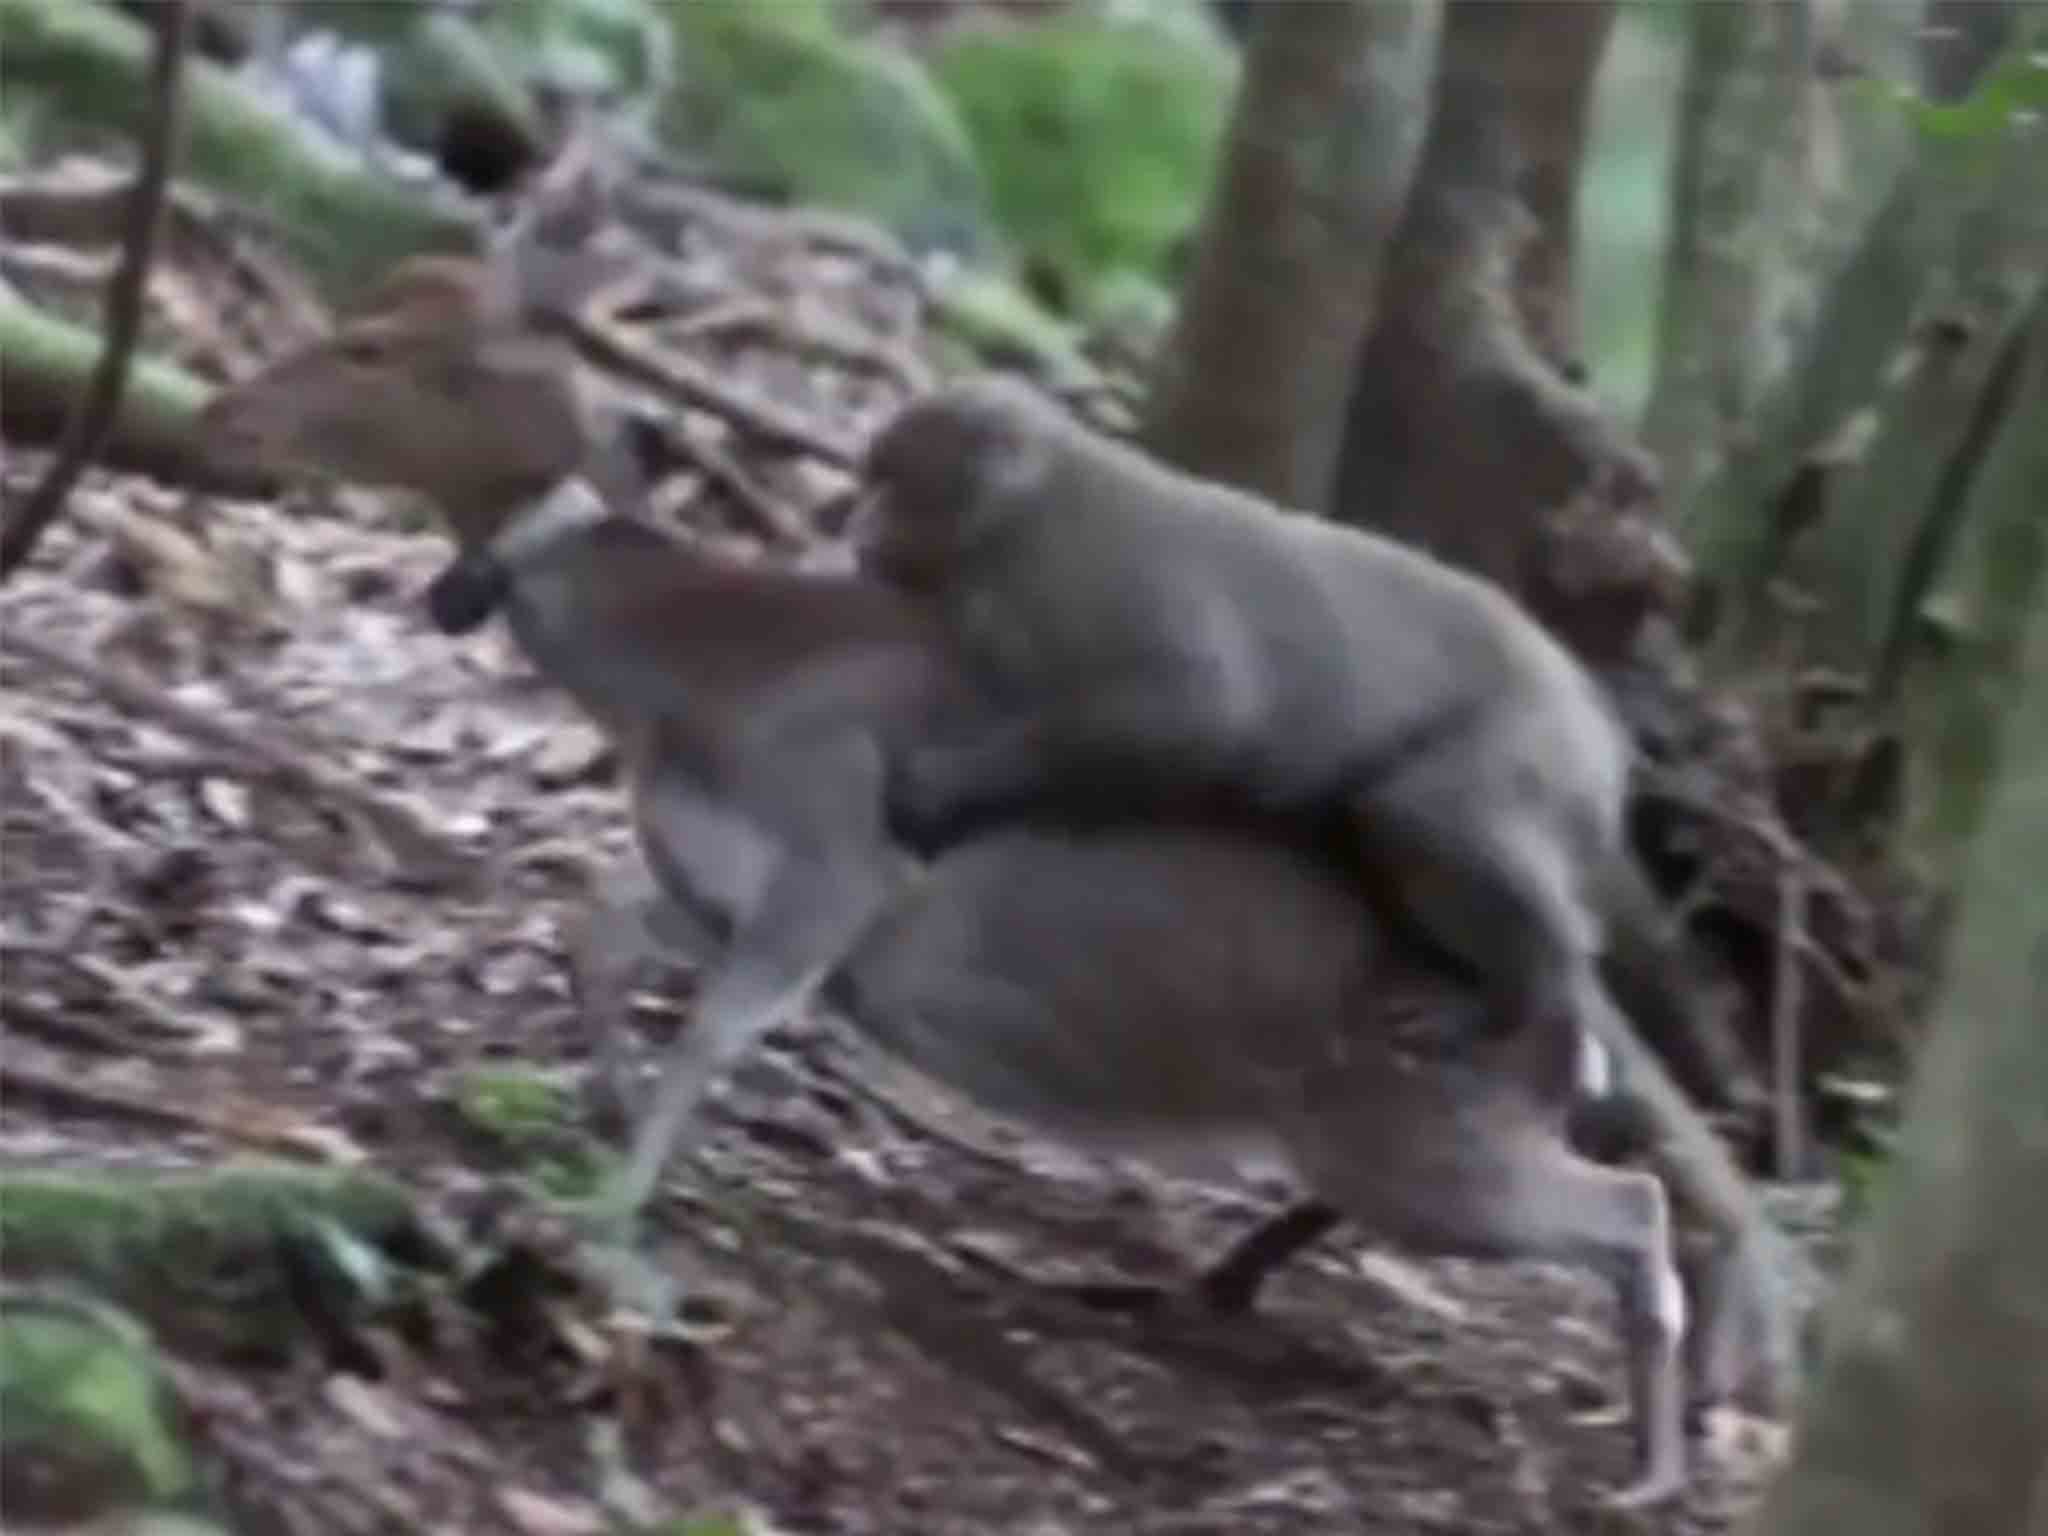 Monkey Xnxxvideos - Sex between monkey and deer may be a new 'behavioural tradition ...